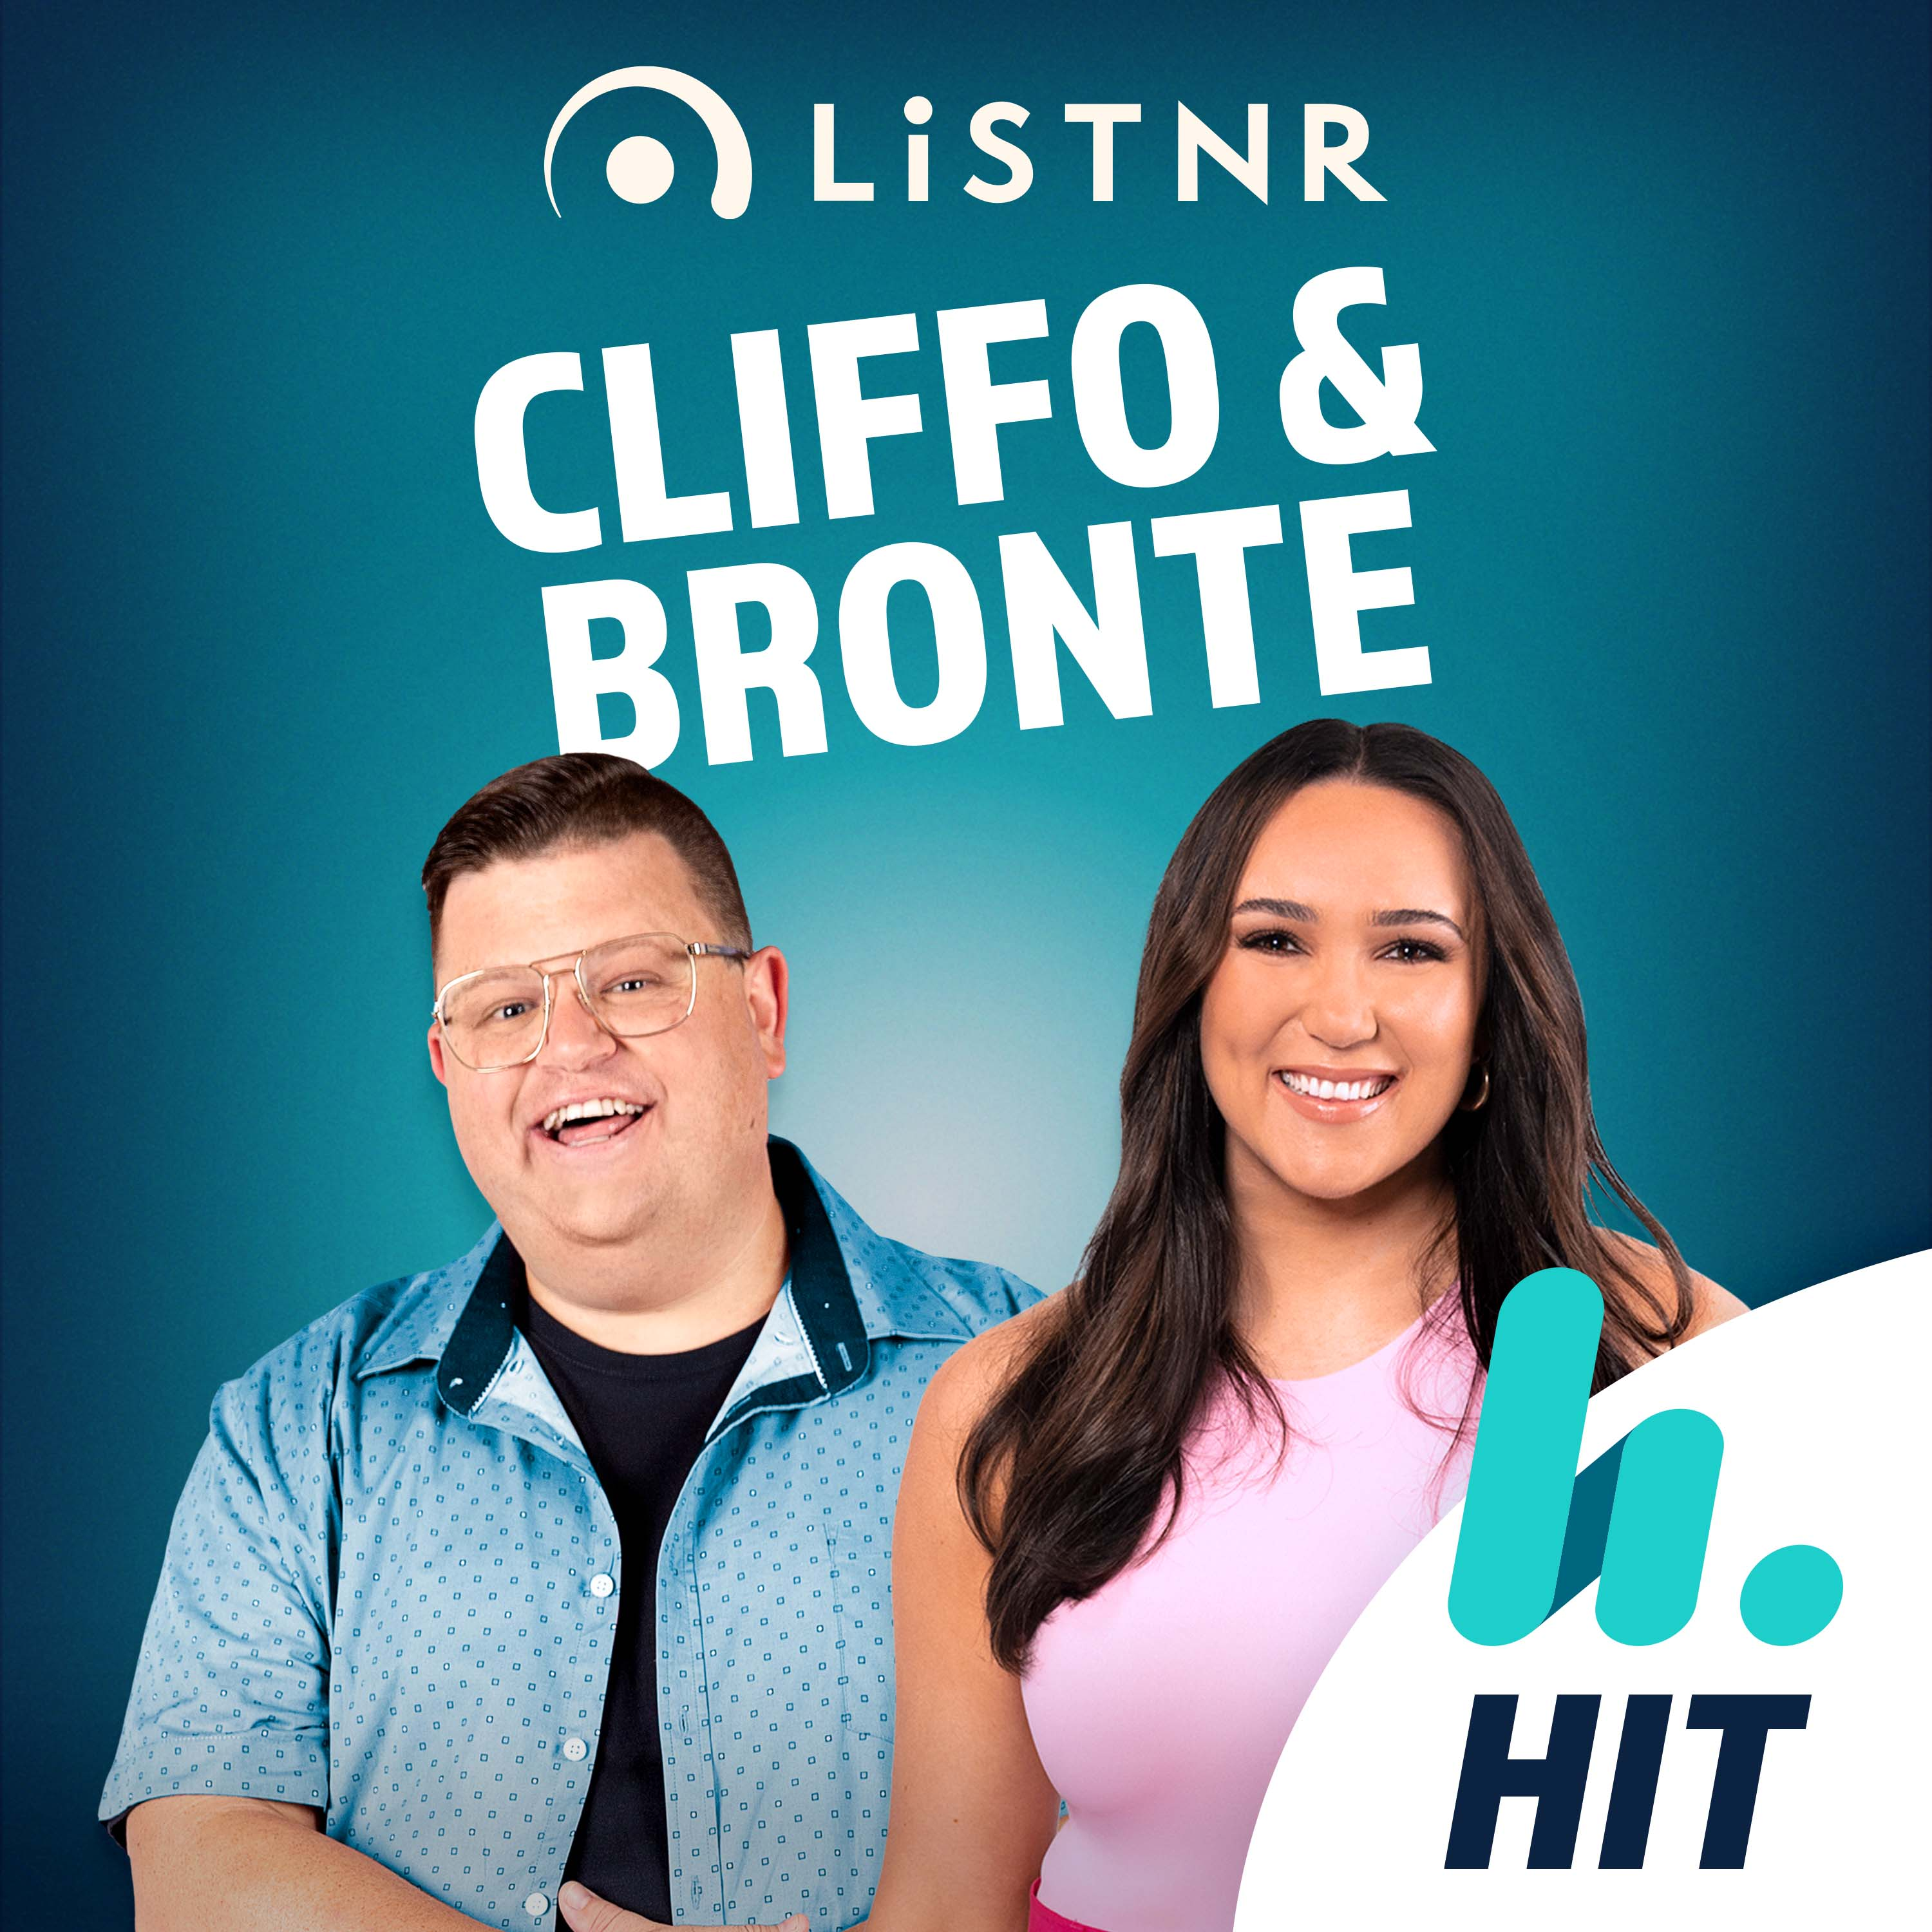 Hit Of Health: Why Cliffo Had To Ban The News | What Did You Do With The Wedding Dress?